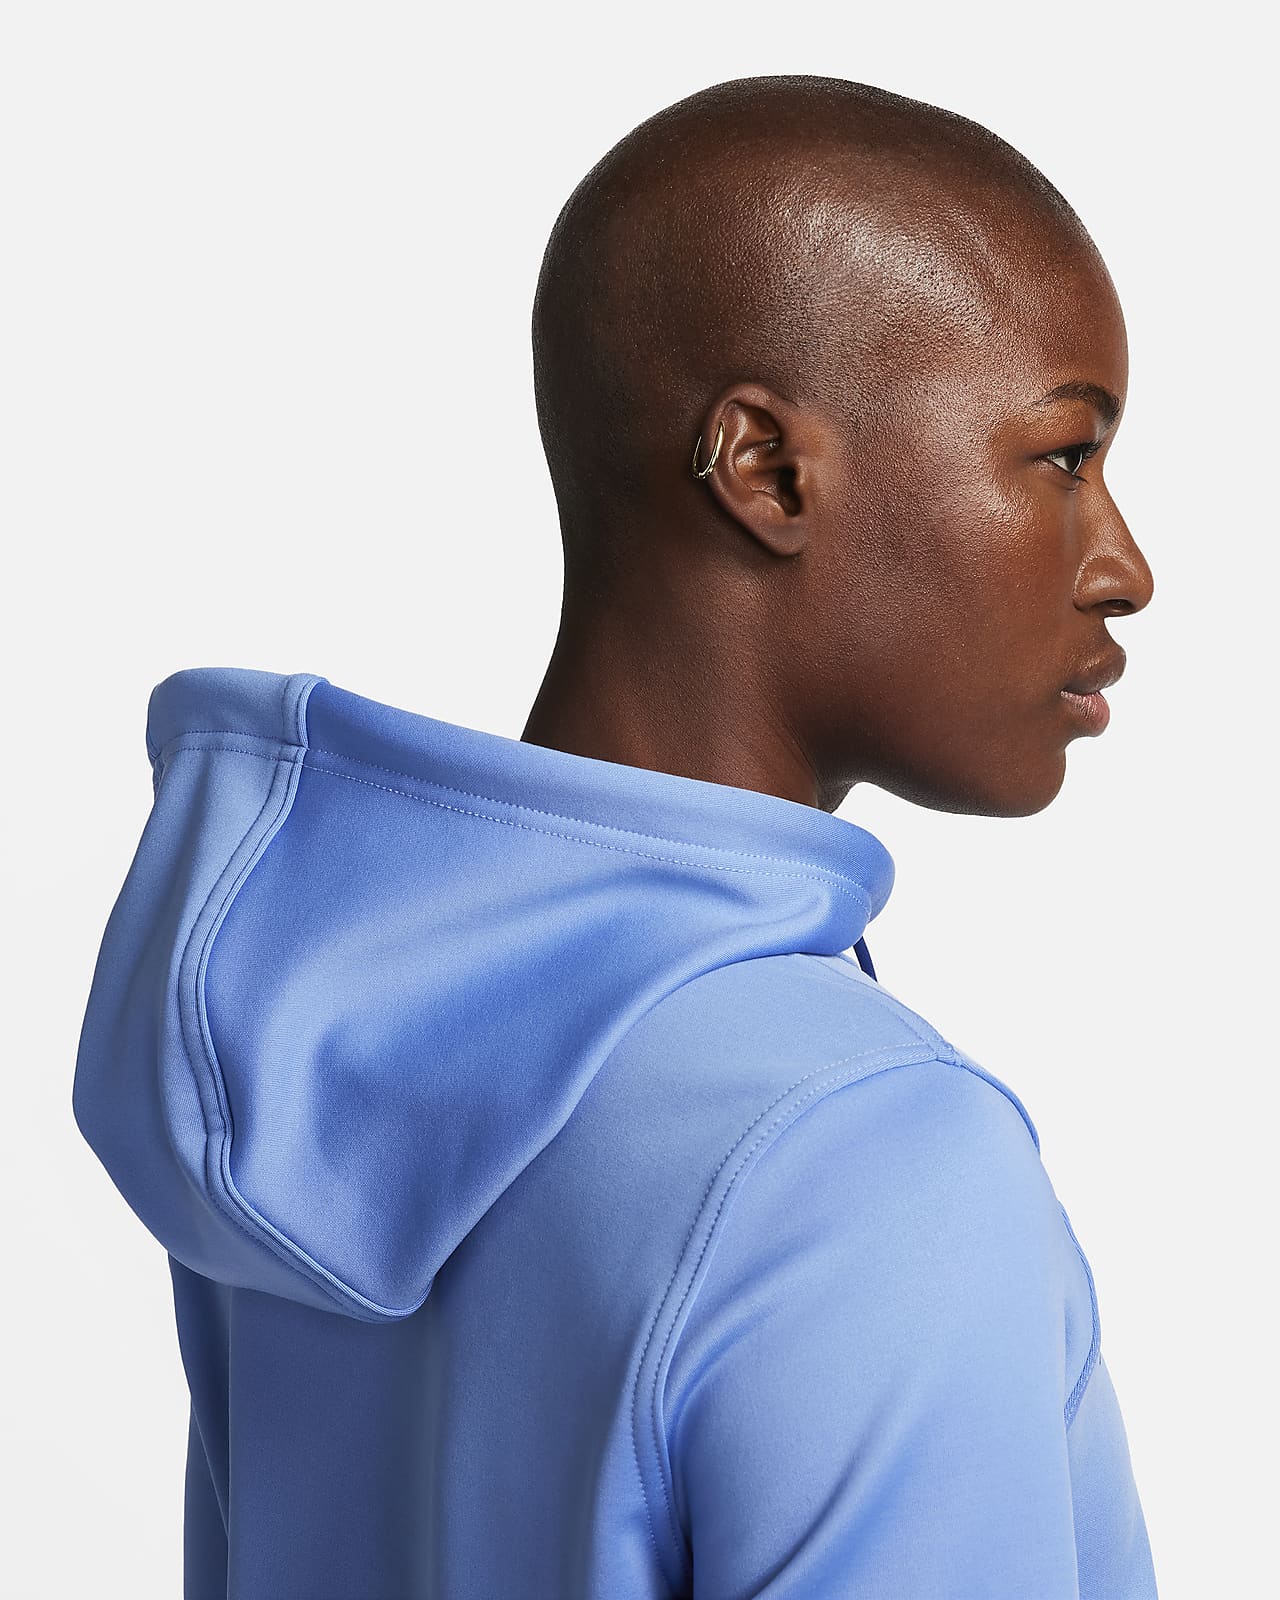 Nike Therma-FIT One Women's Pullover Hoodie.